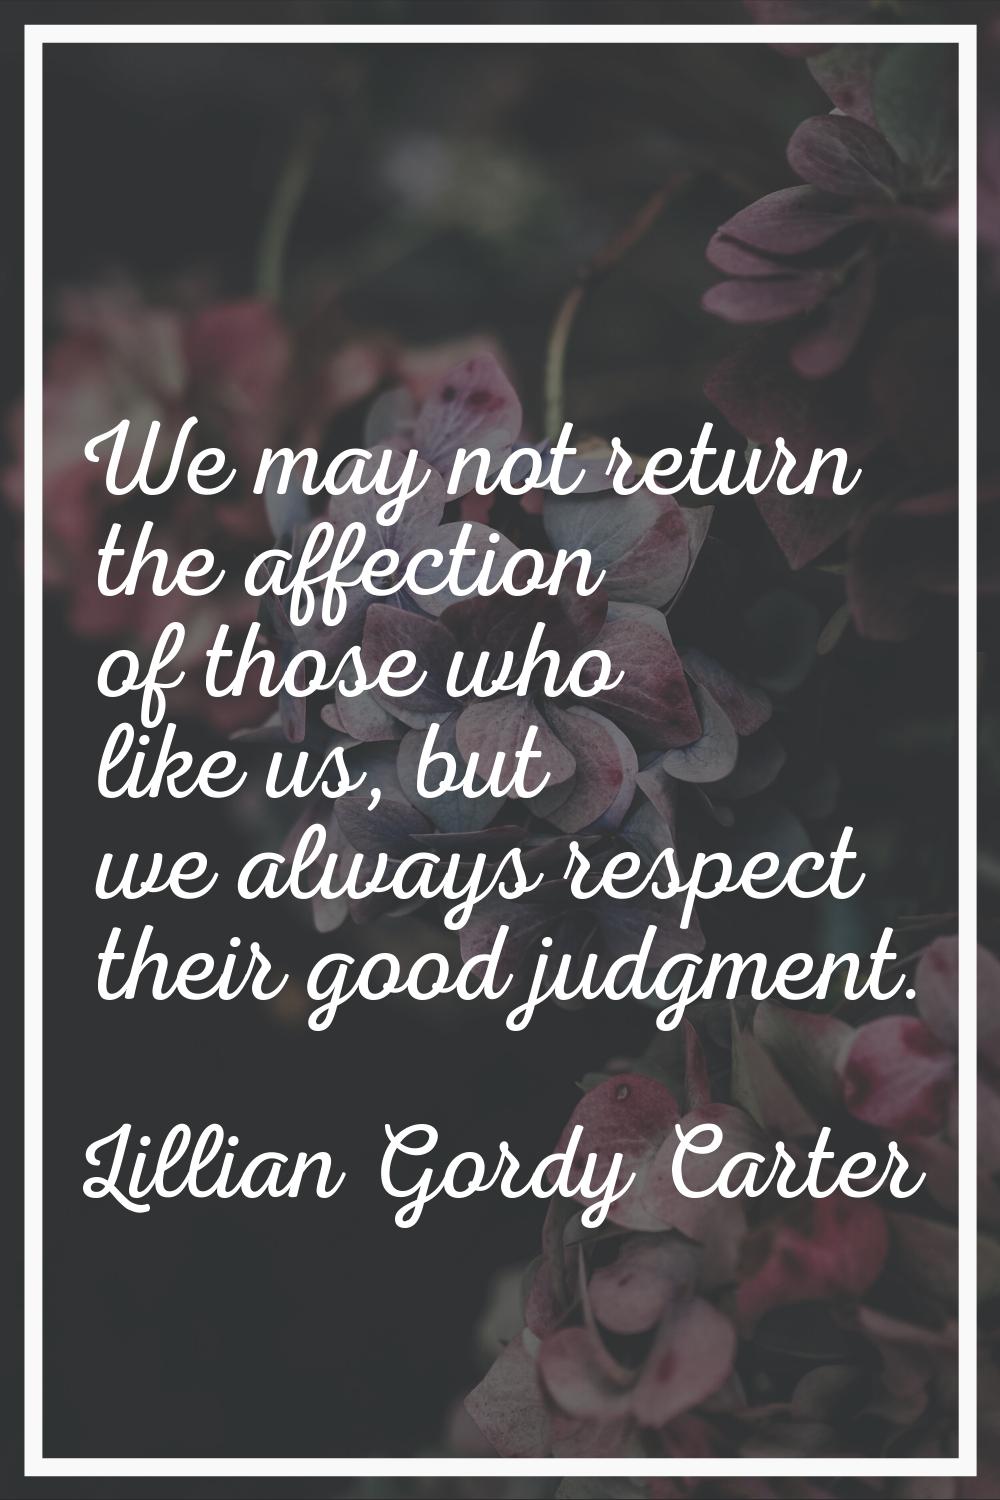 We may not return the affection of those who like us, but we always respect their good judgment.